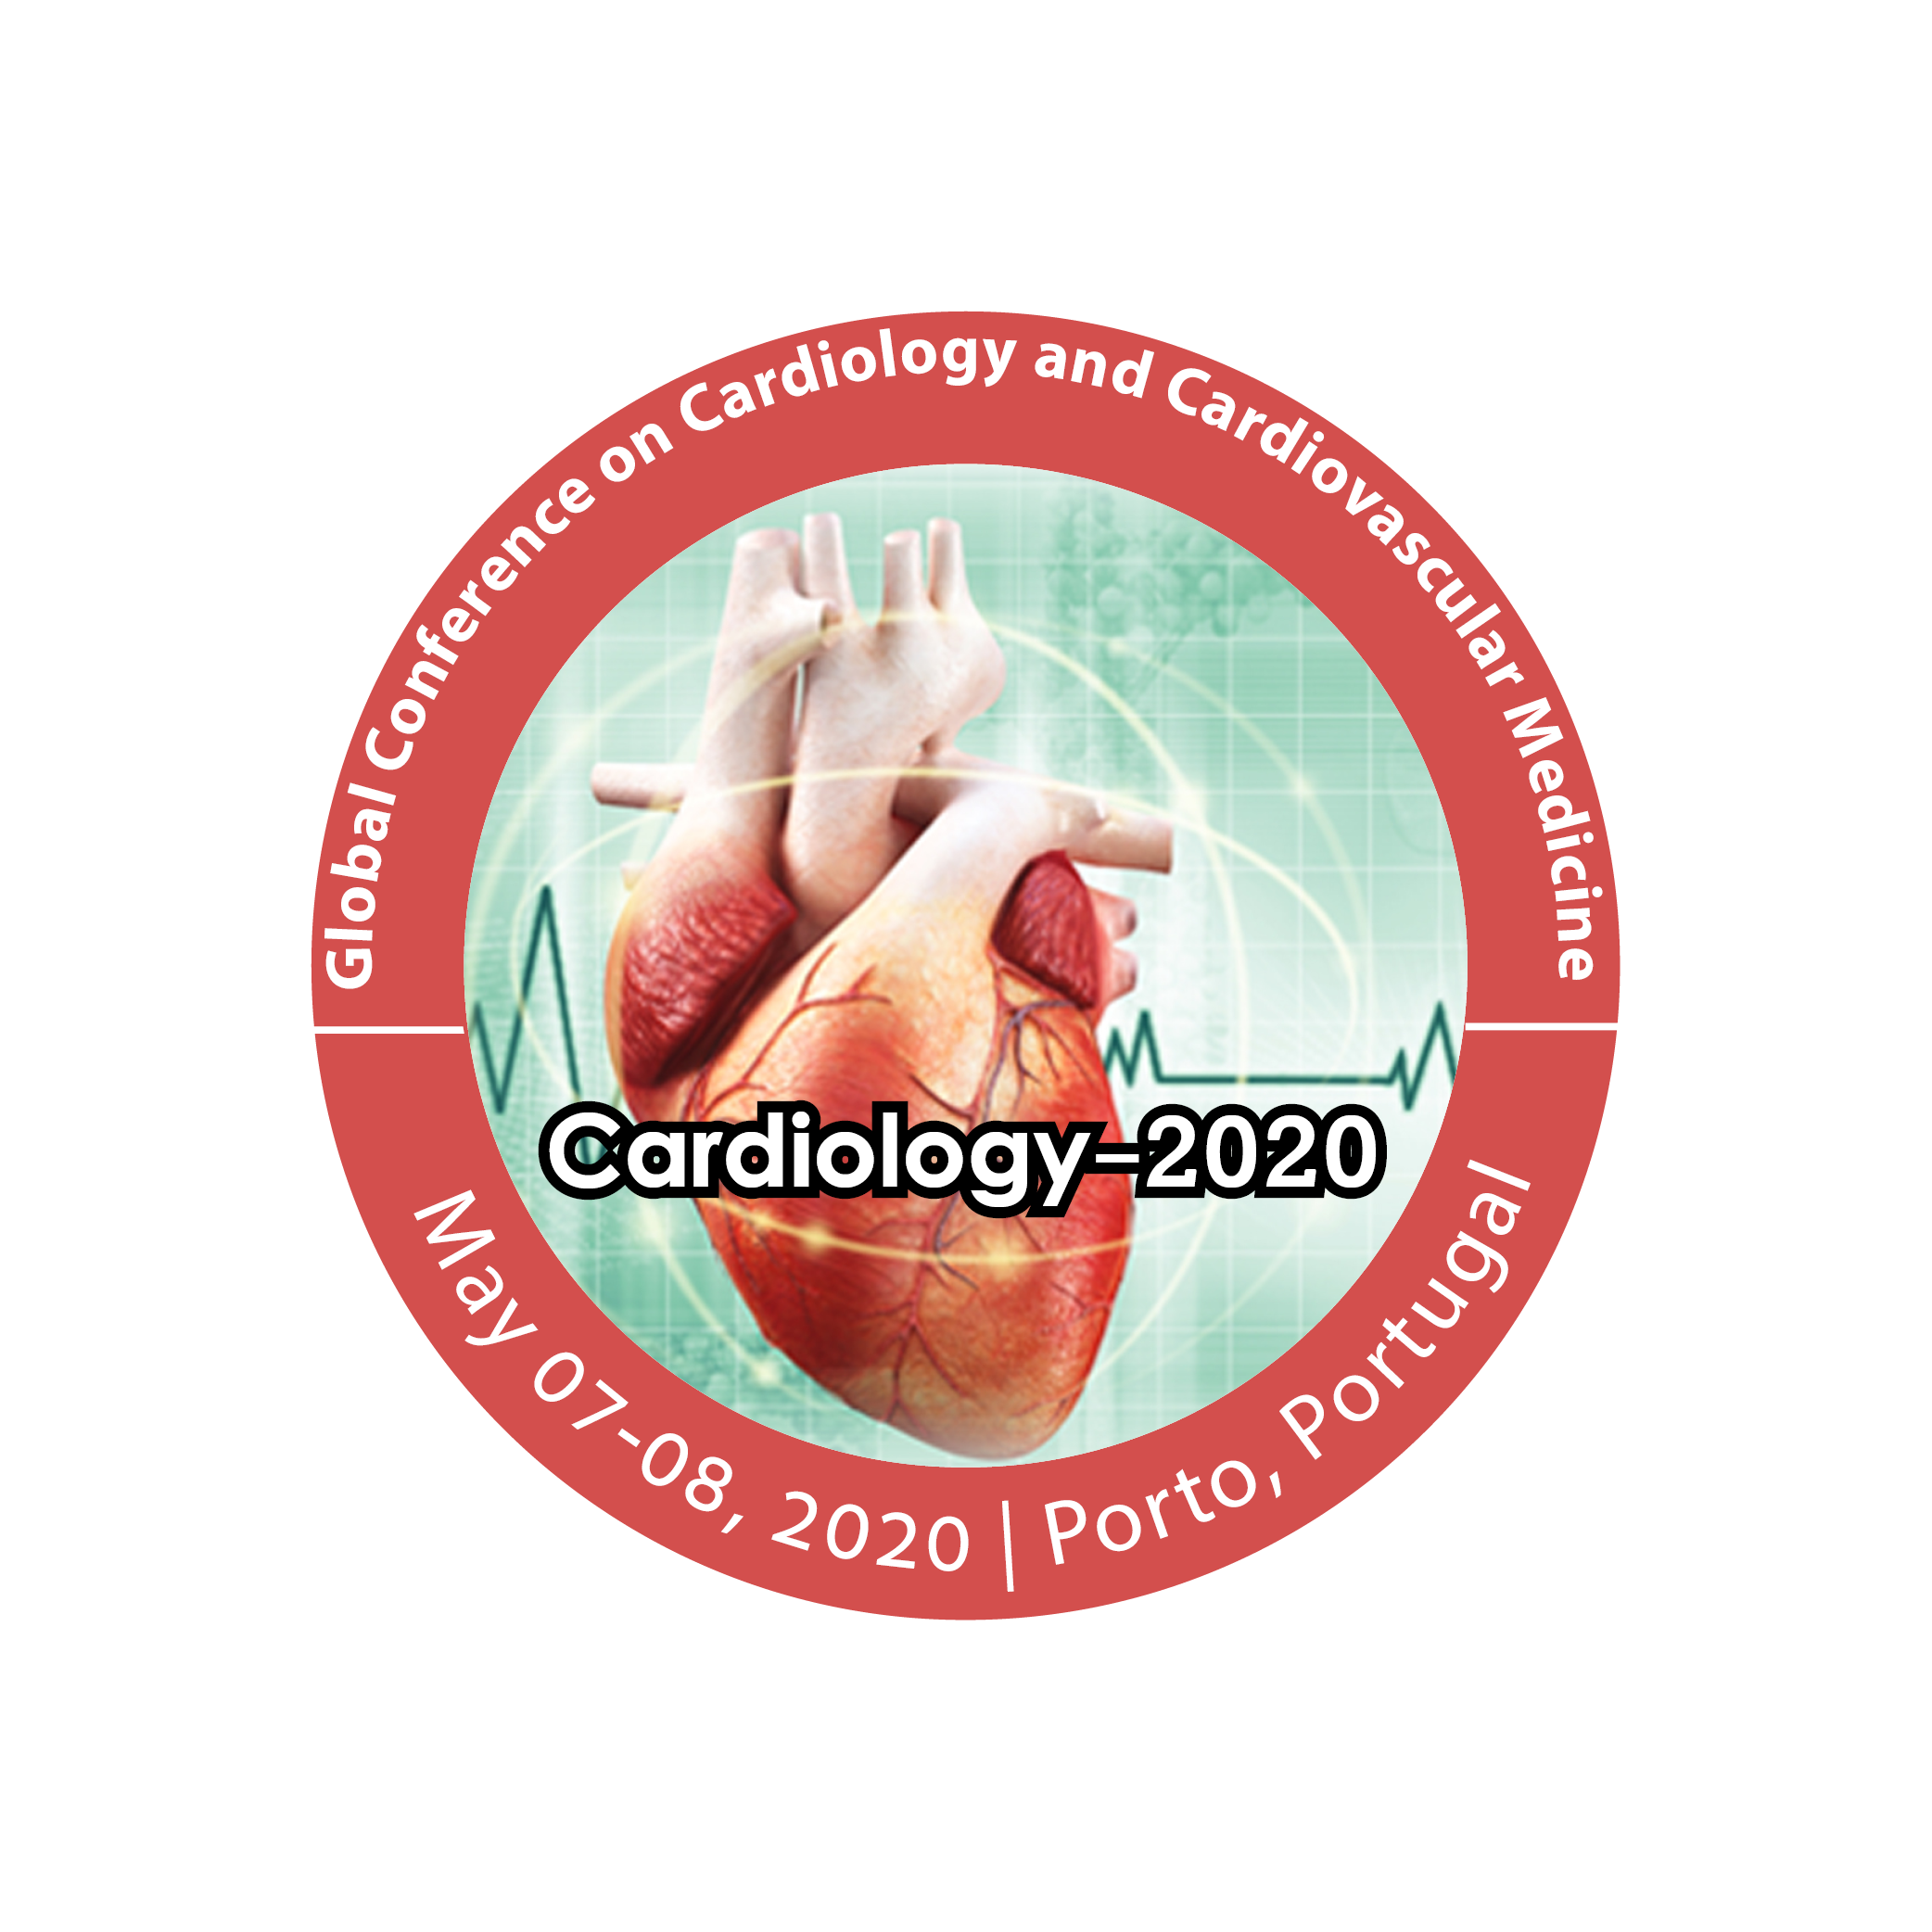 Global Conference on Cardiology and Cardiovascular Medicine, Porto, Portugal